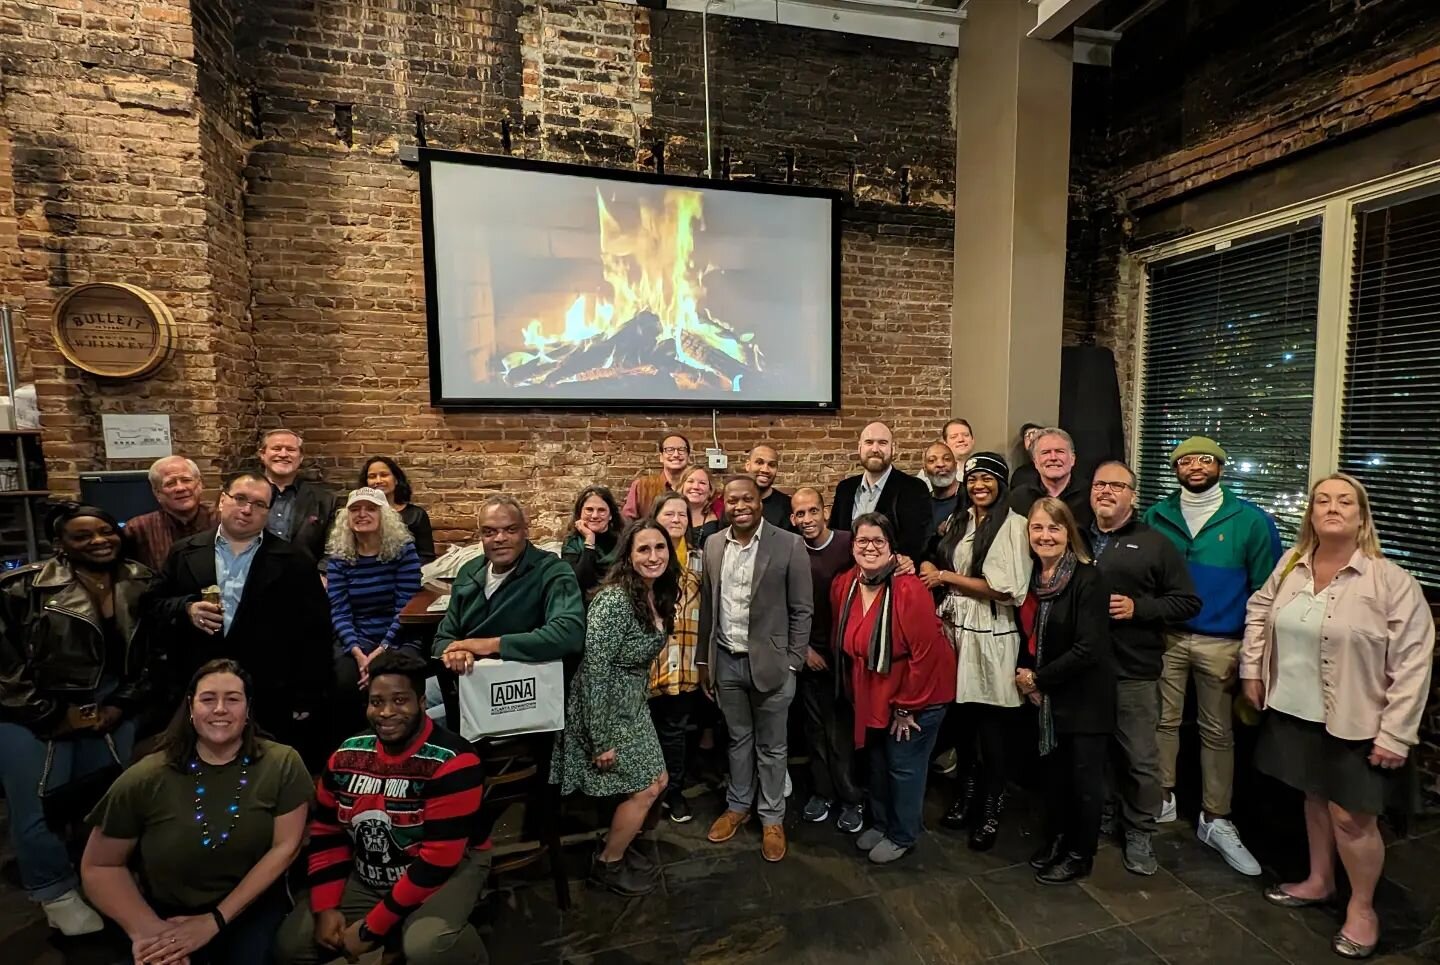 Happy Holidays to all our Downtown Neighbors! Special thanks to @parkbaratl for hosting our holiday party